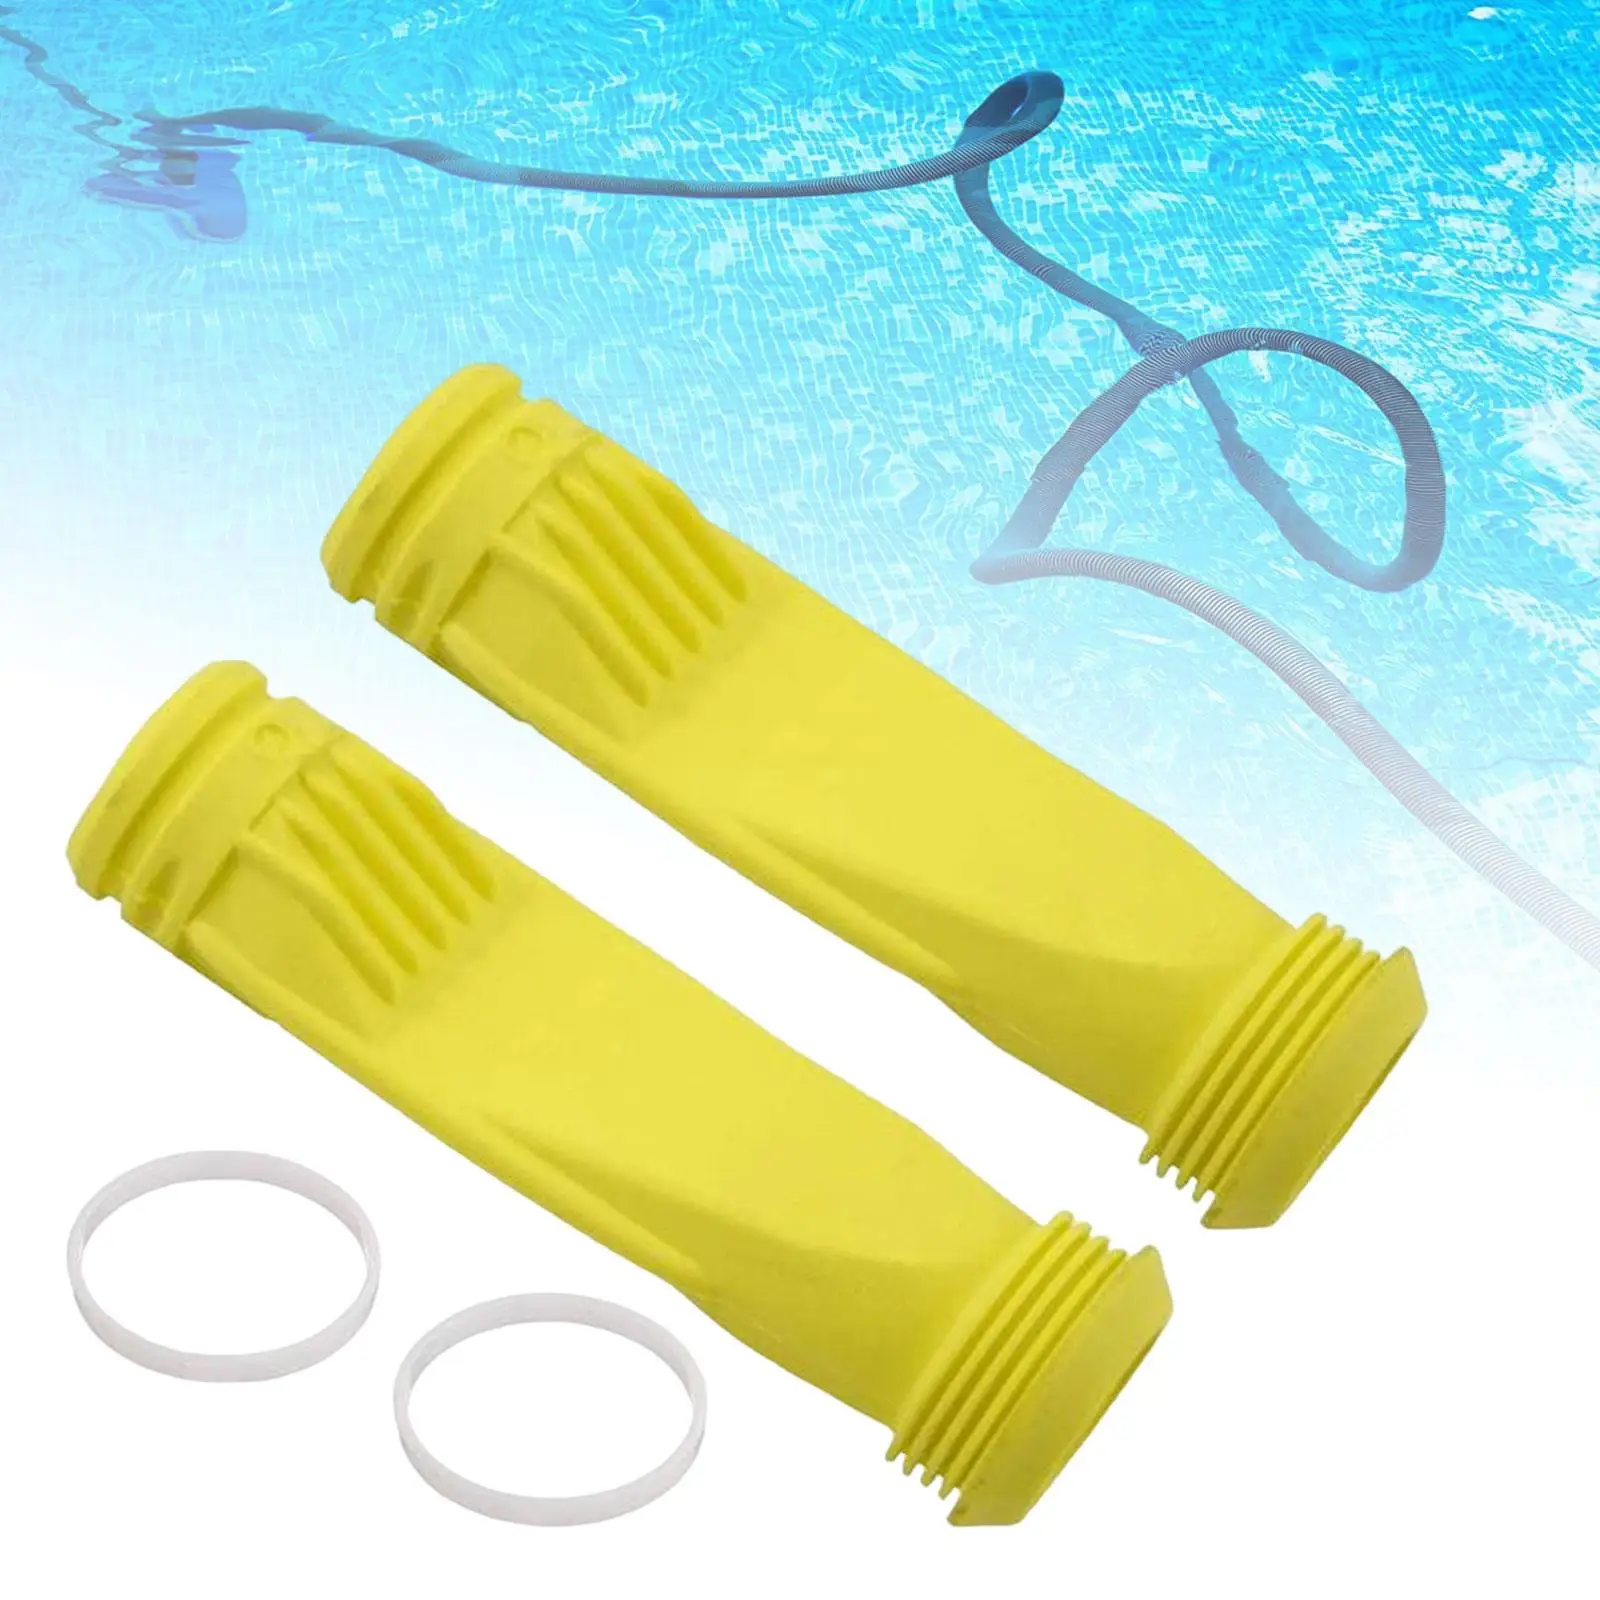 2x Pool Cleaner Diaphragm Strong Replacement Accessory Durable Professional Convenient Installation Heavy Duty Rubber W69698